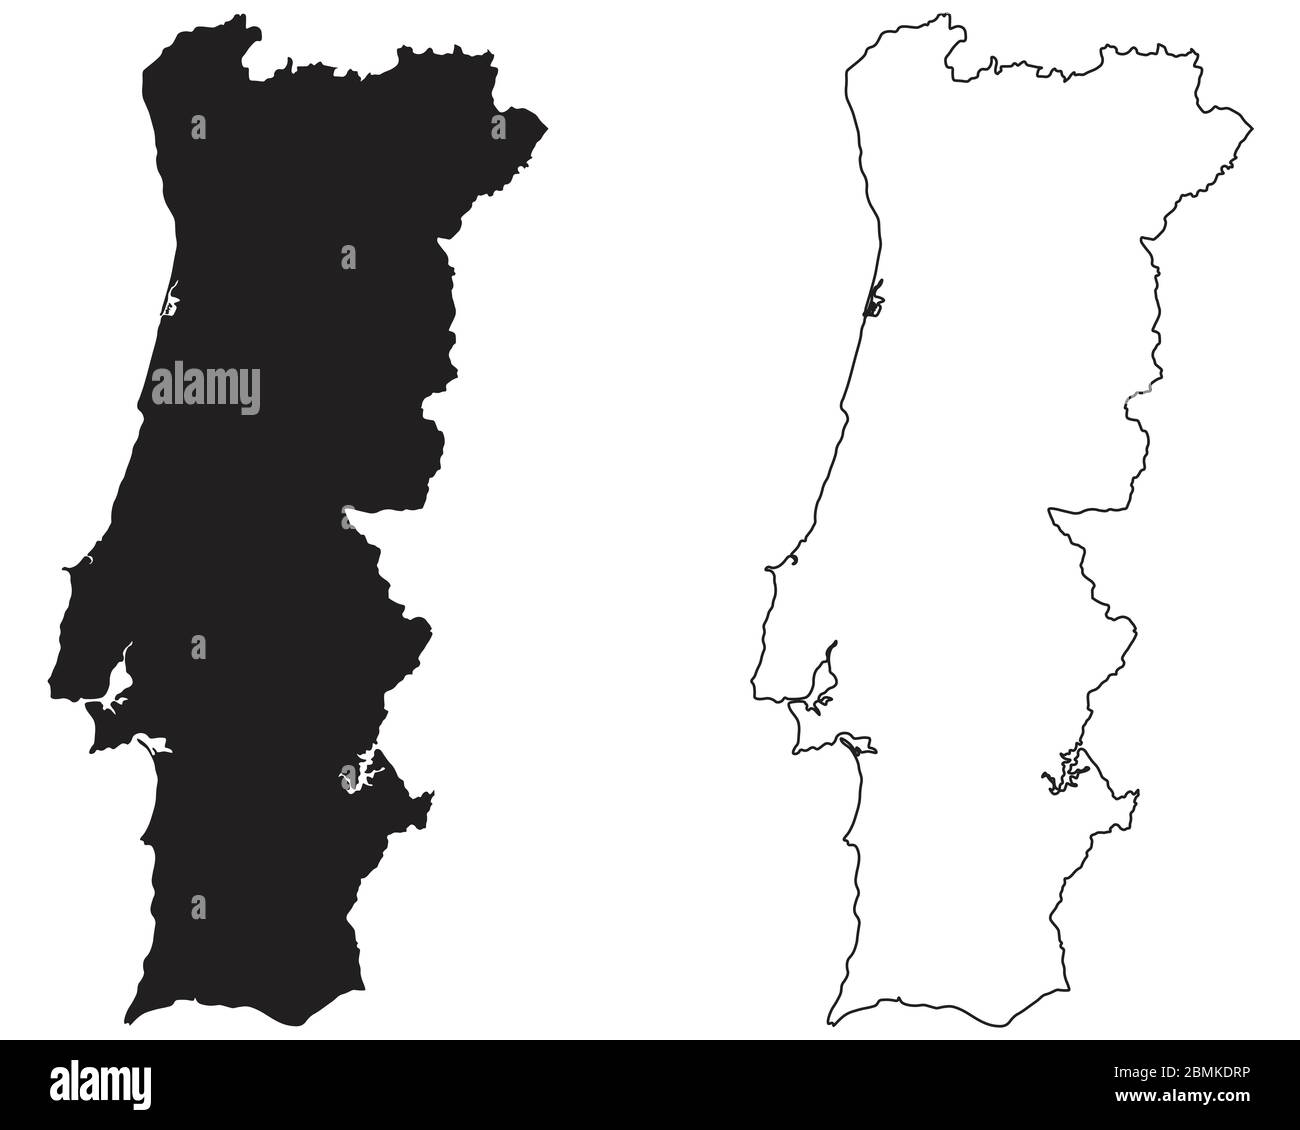 Portugal Country Map. Black silhouette and outline isolated on white background. EPS Vector Stock Vector